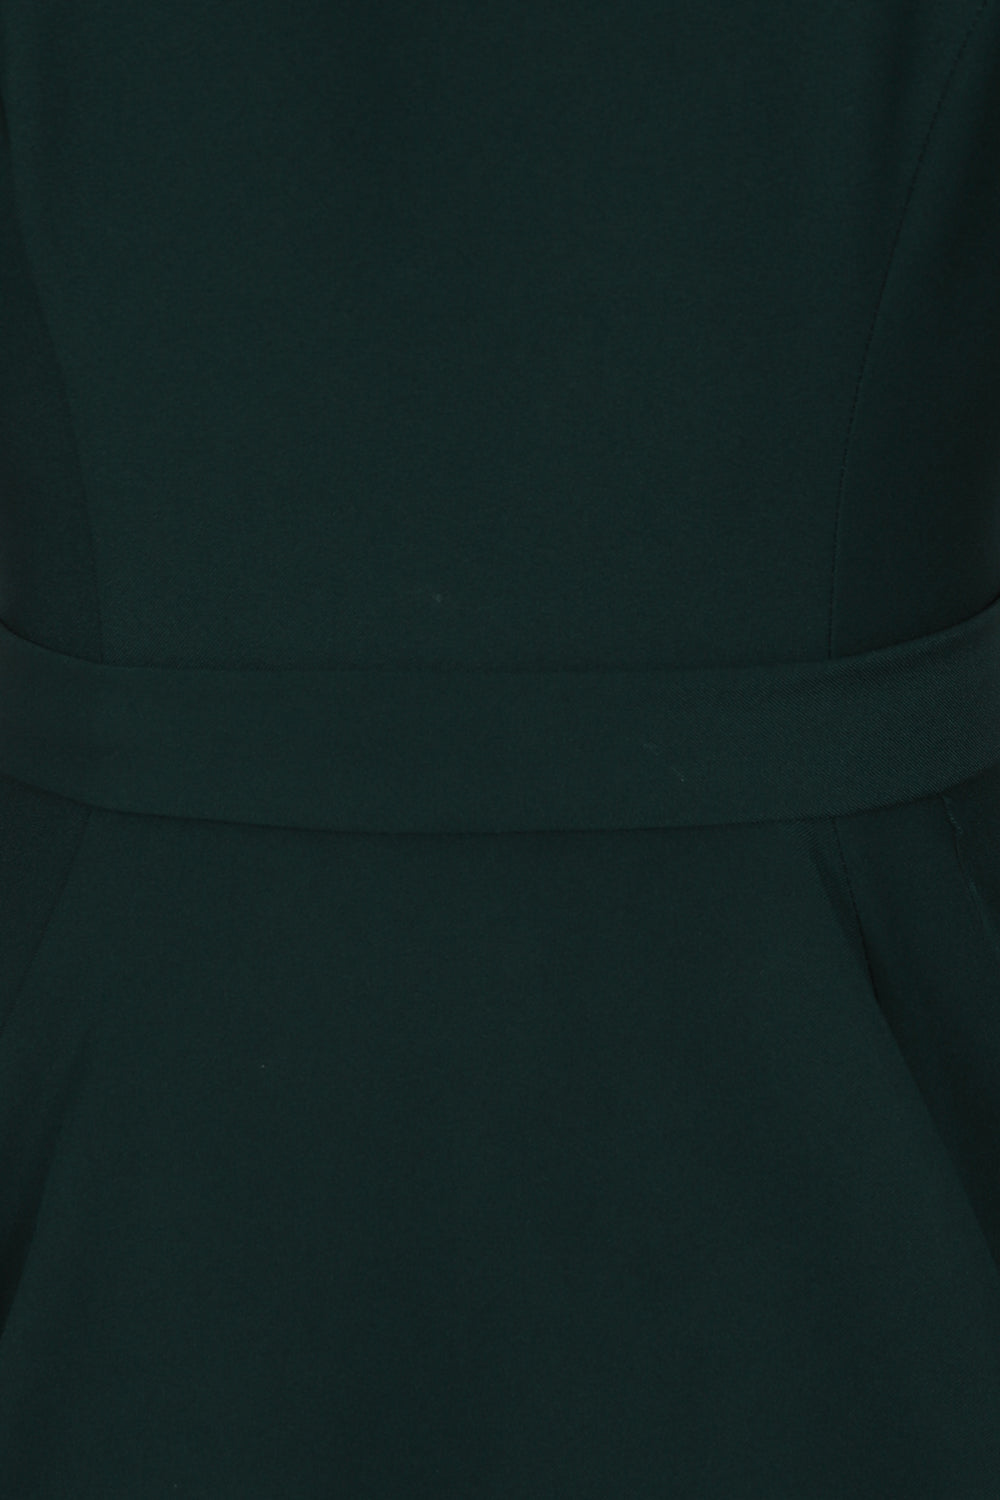 Gabriella Swing Dress in Emerald Green by Hearts and Roses